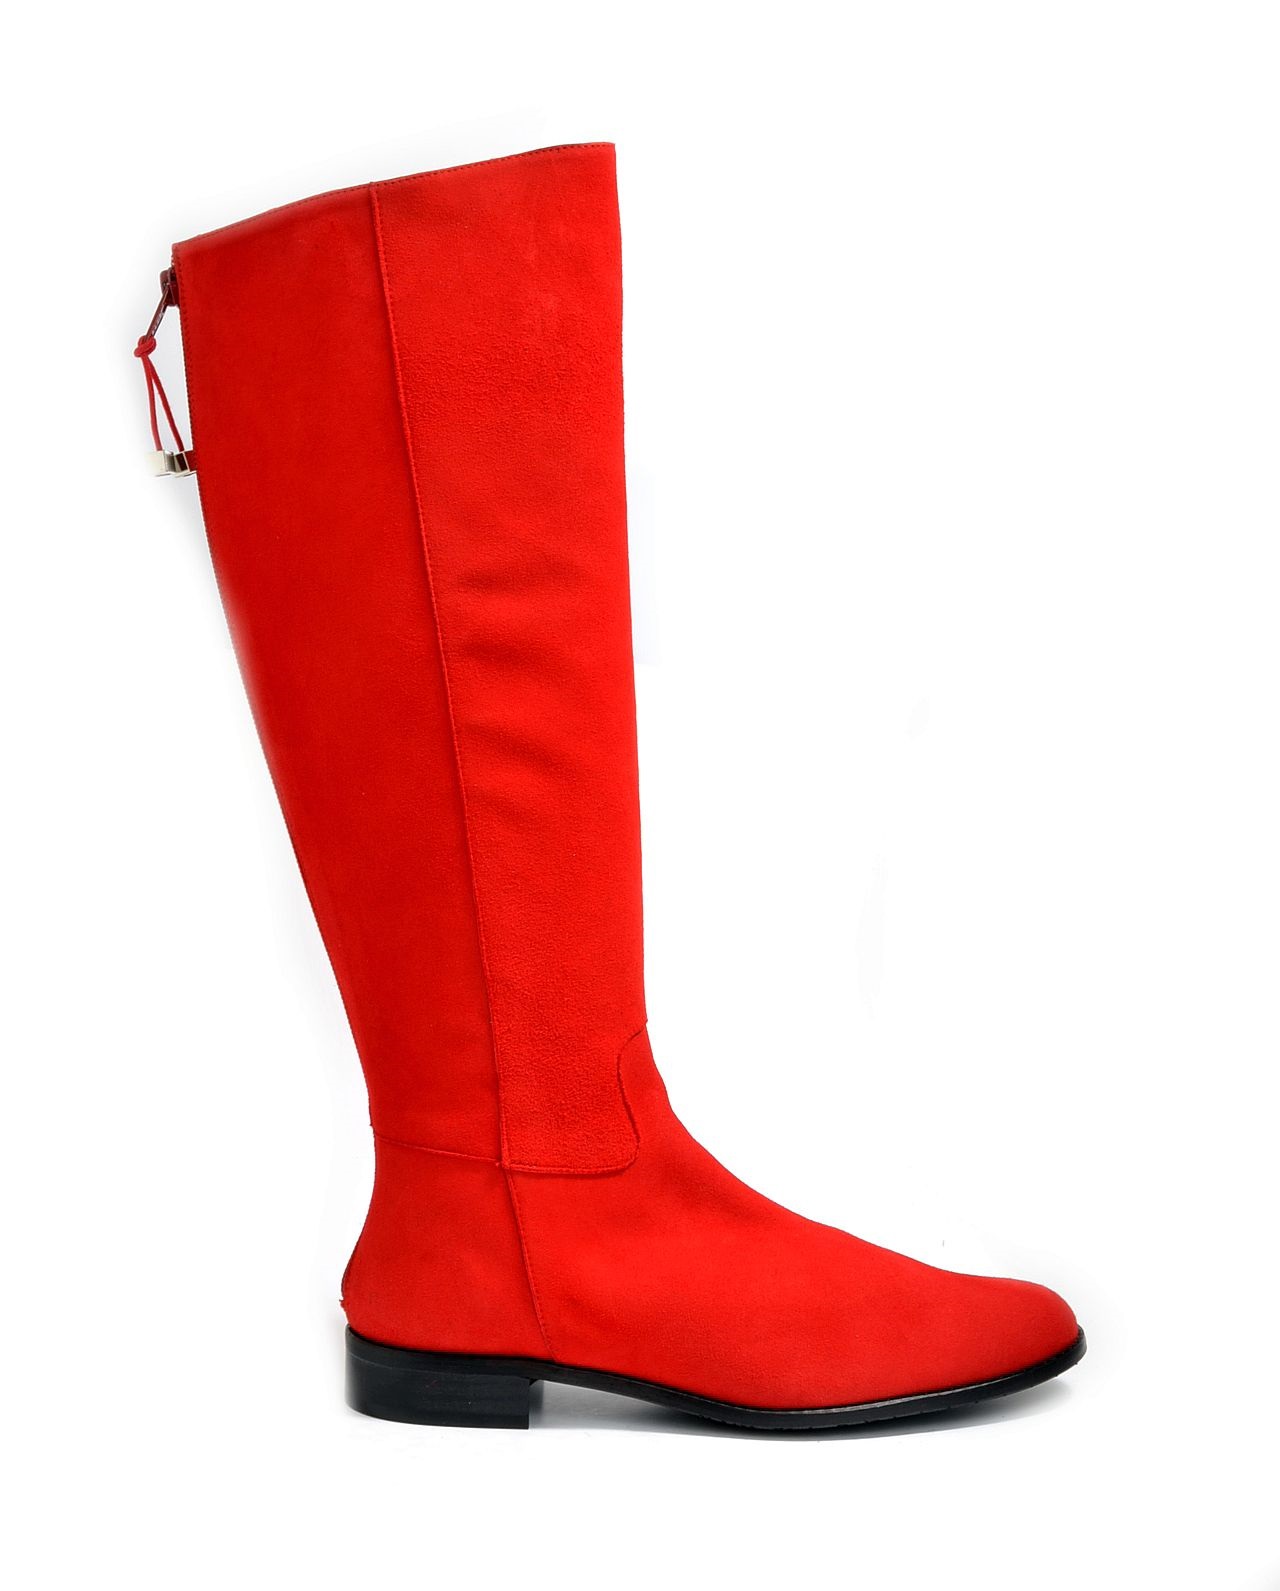 Womens Eye Knee High Leather Riding Boots J 16 Red Suede